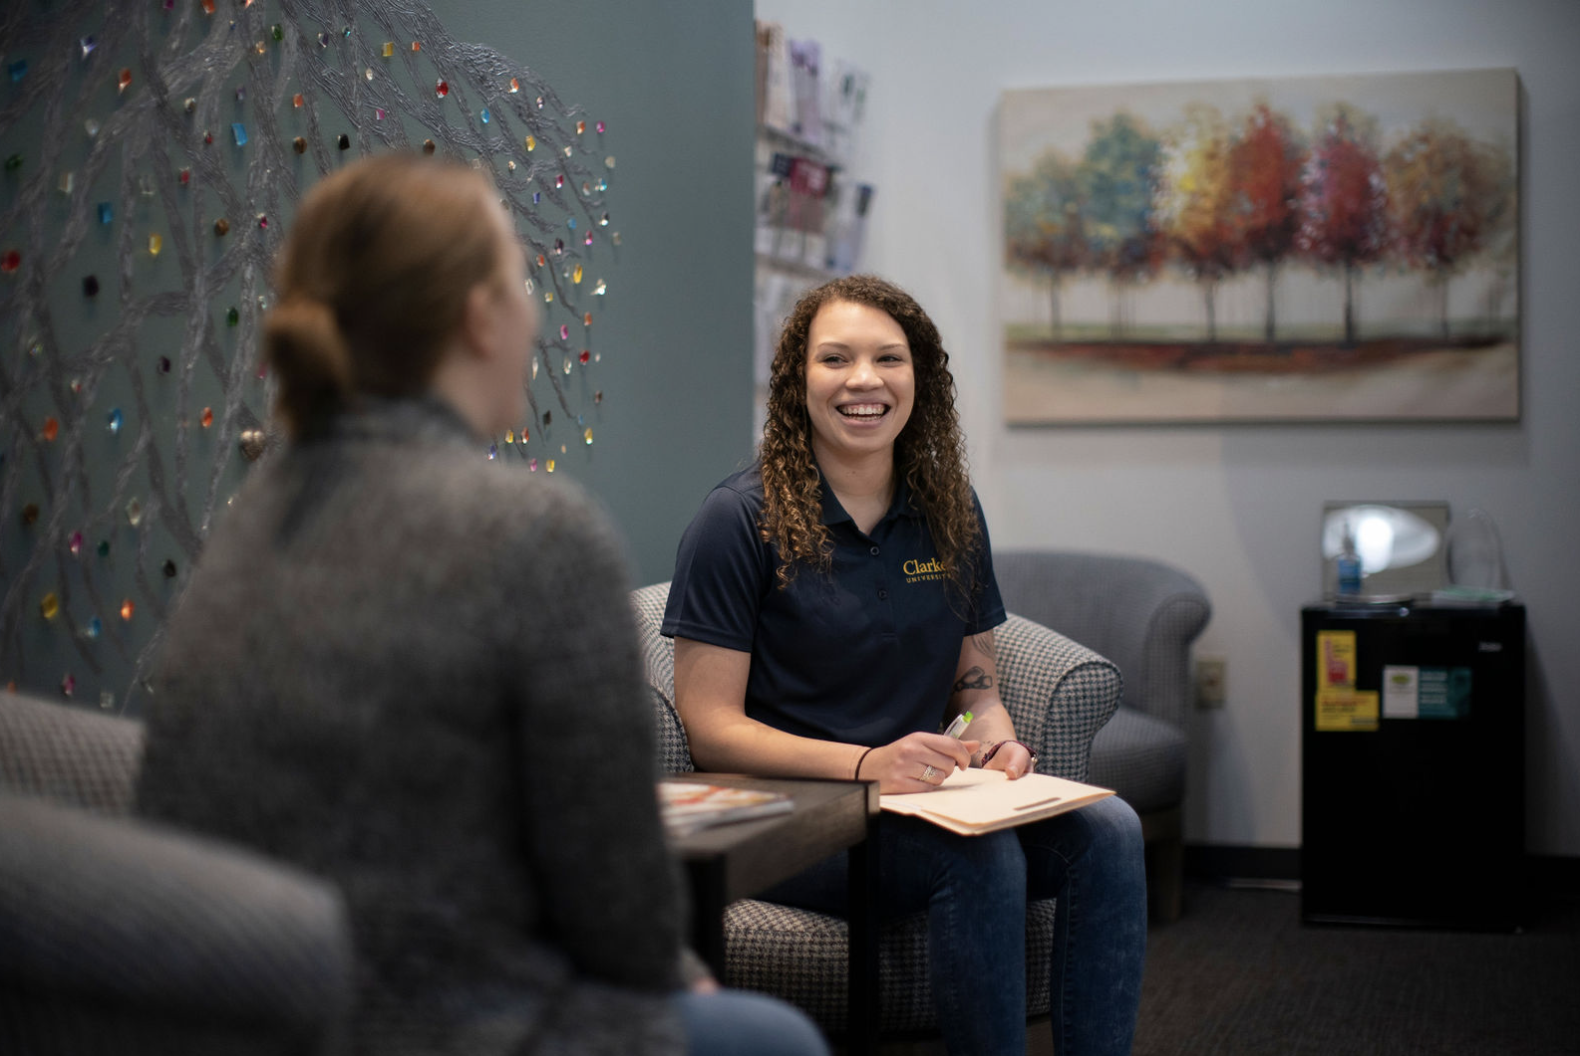 Clarke University Master of Social Work student at Dubuque Riverview Center